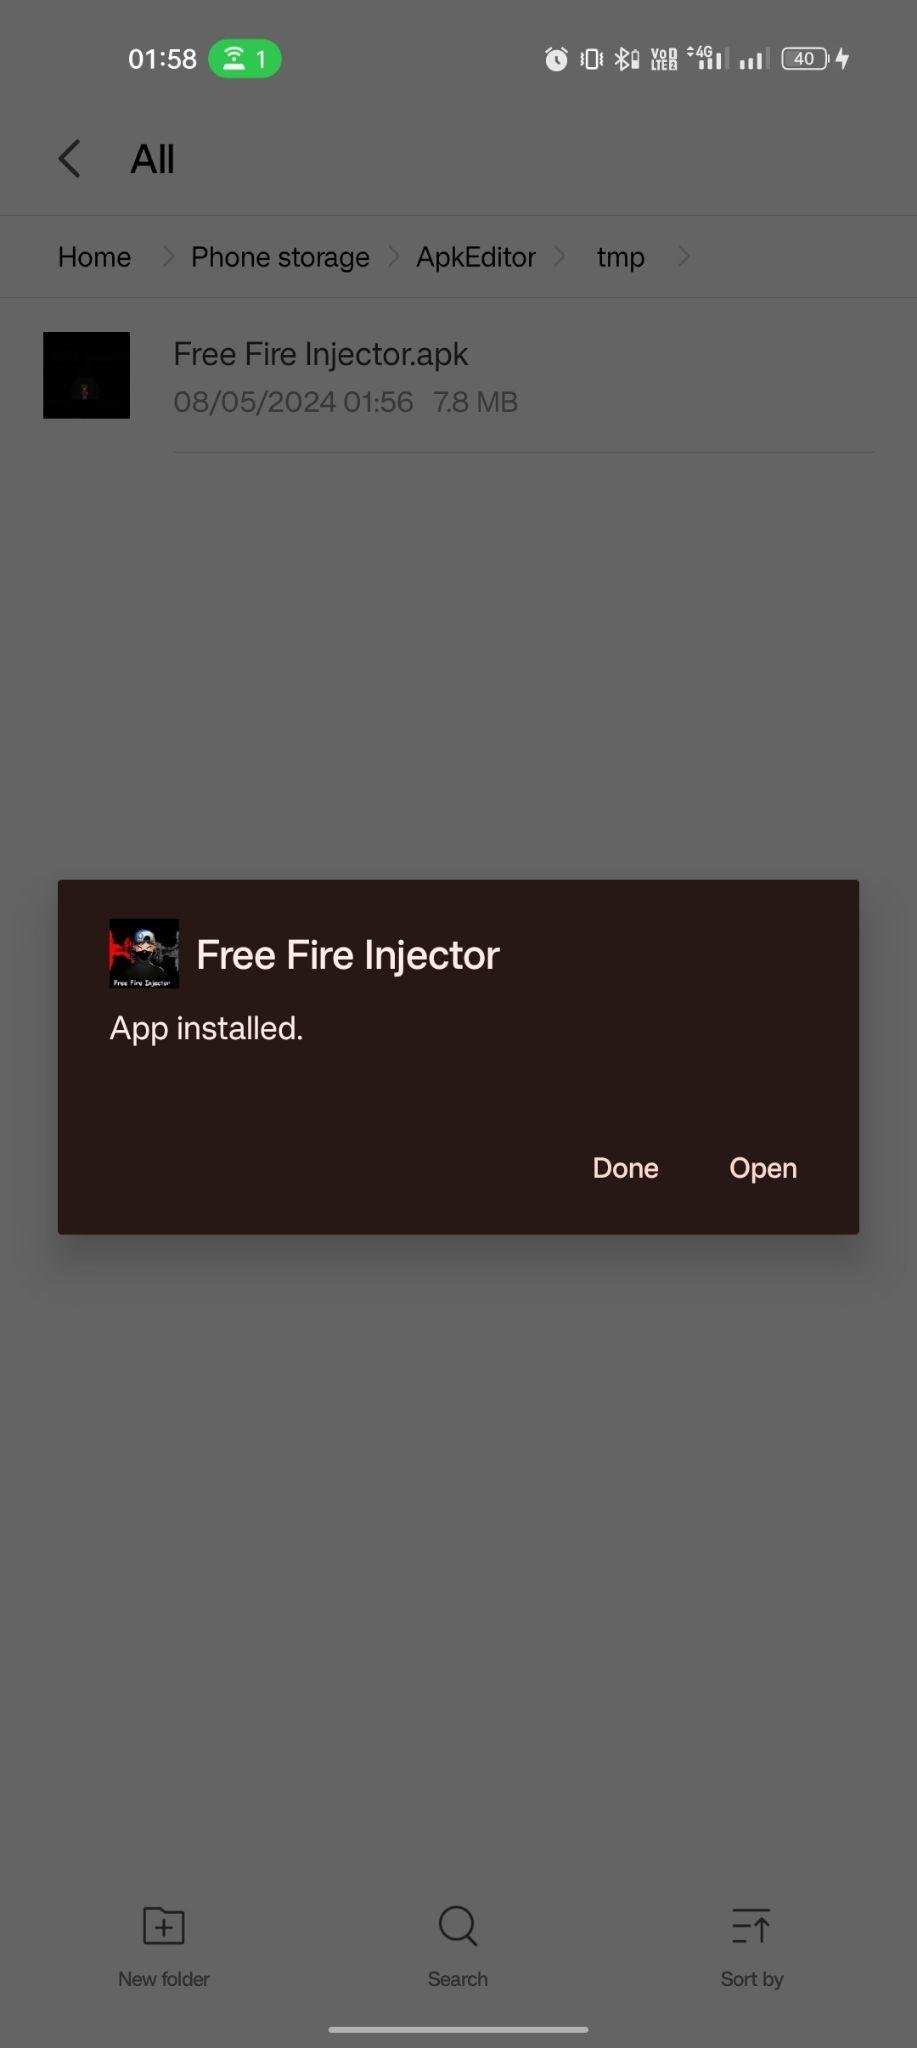 Free Fire Injector apk installed